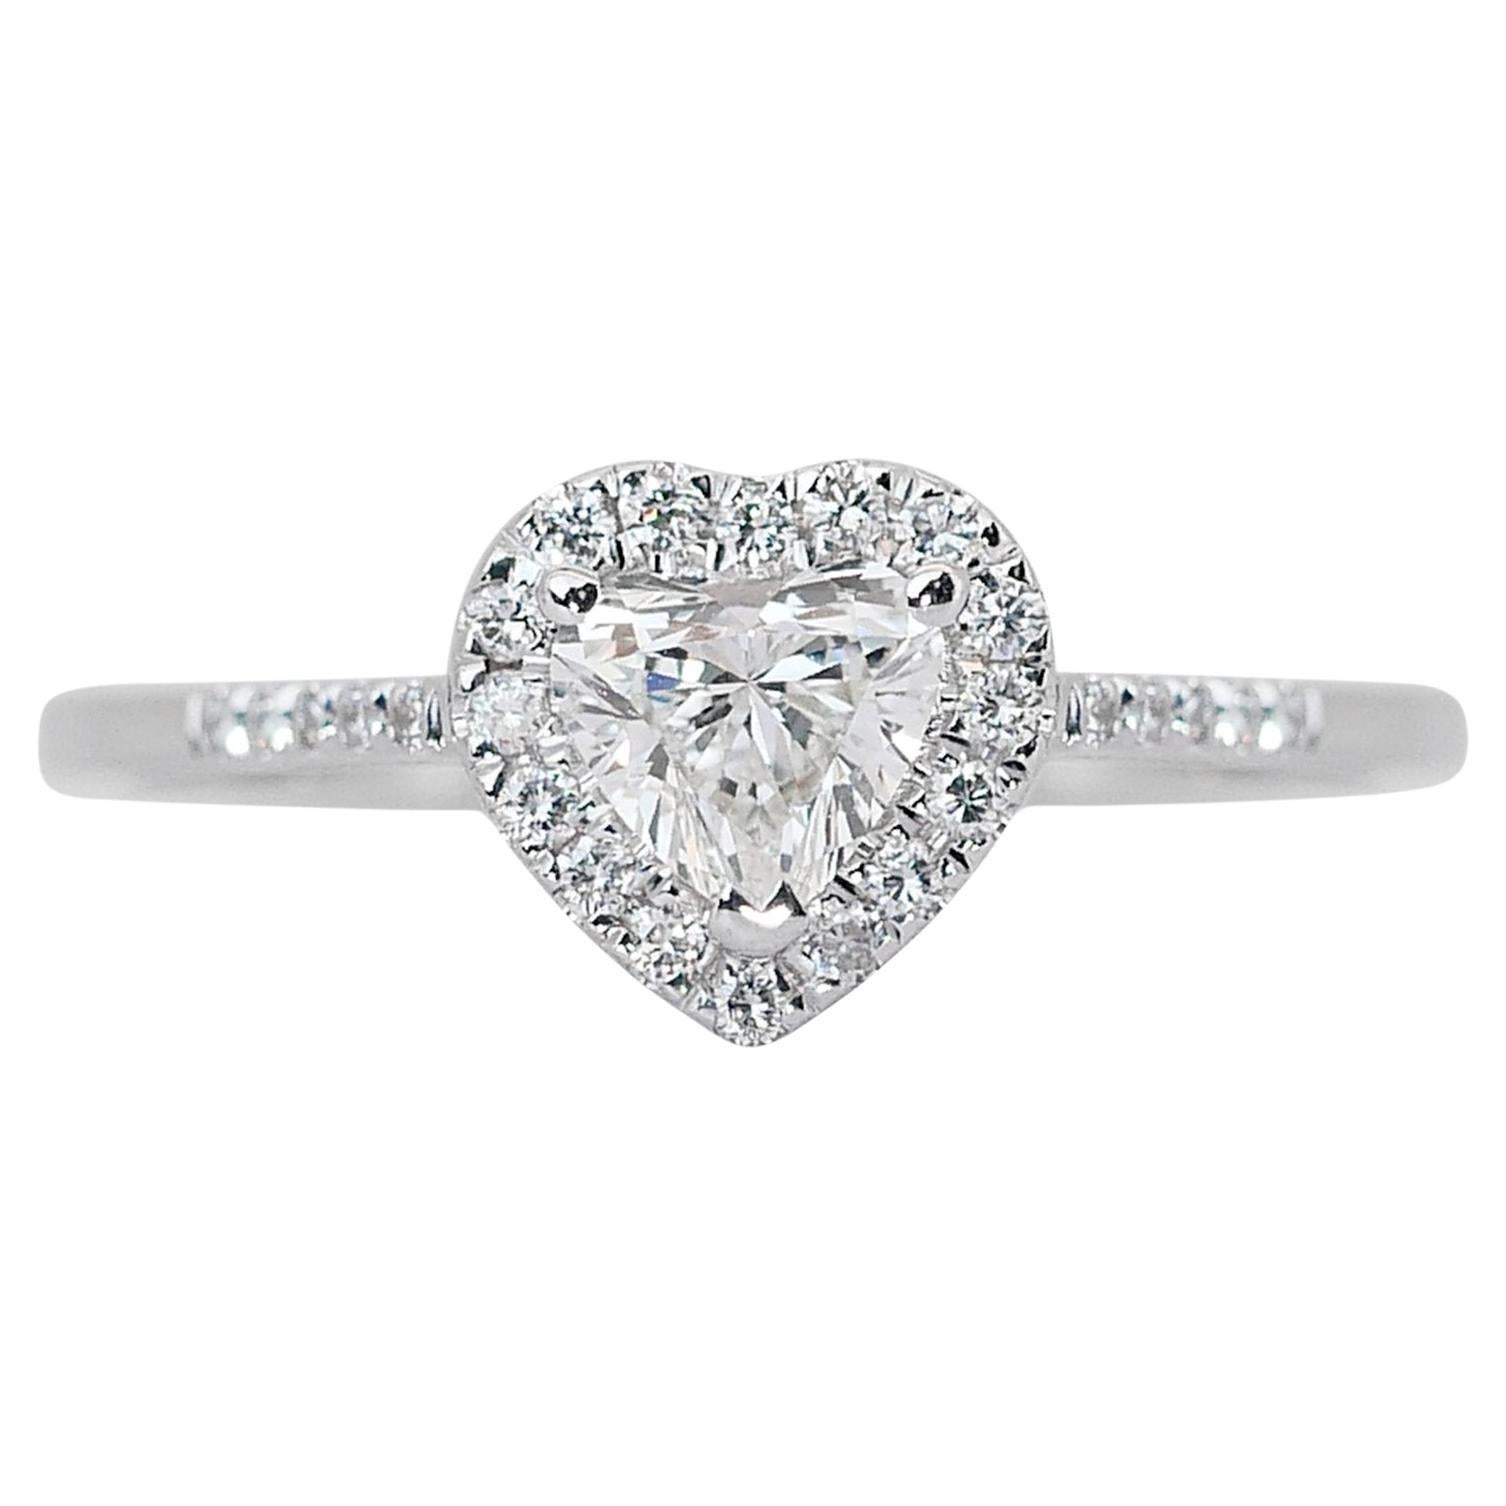 Charming 0.75ct Diamonds Halo Ring in 18k White Gold - IGI Certified For Sale